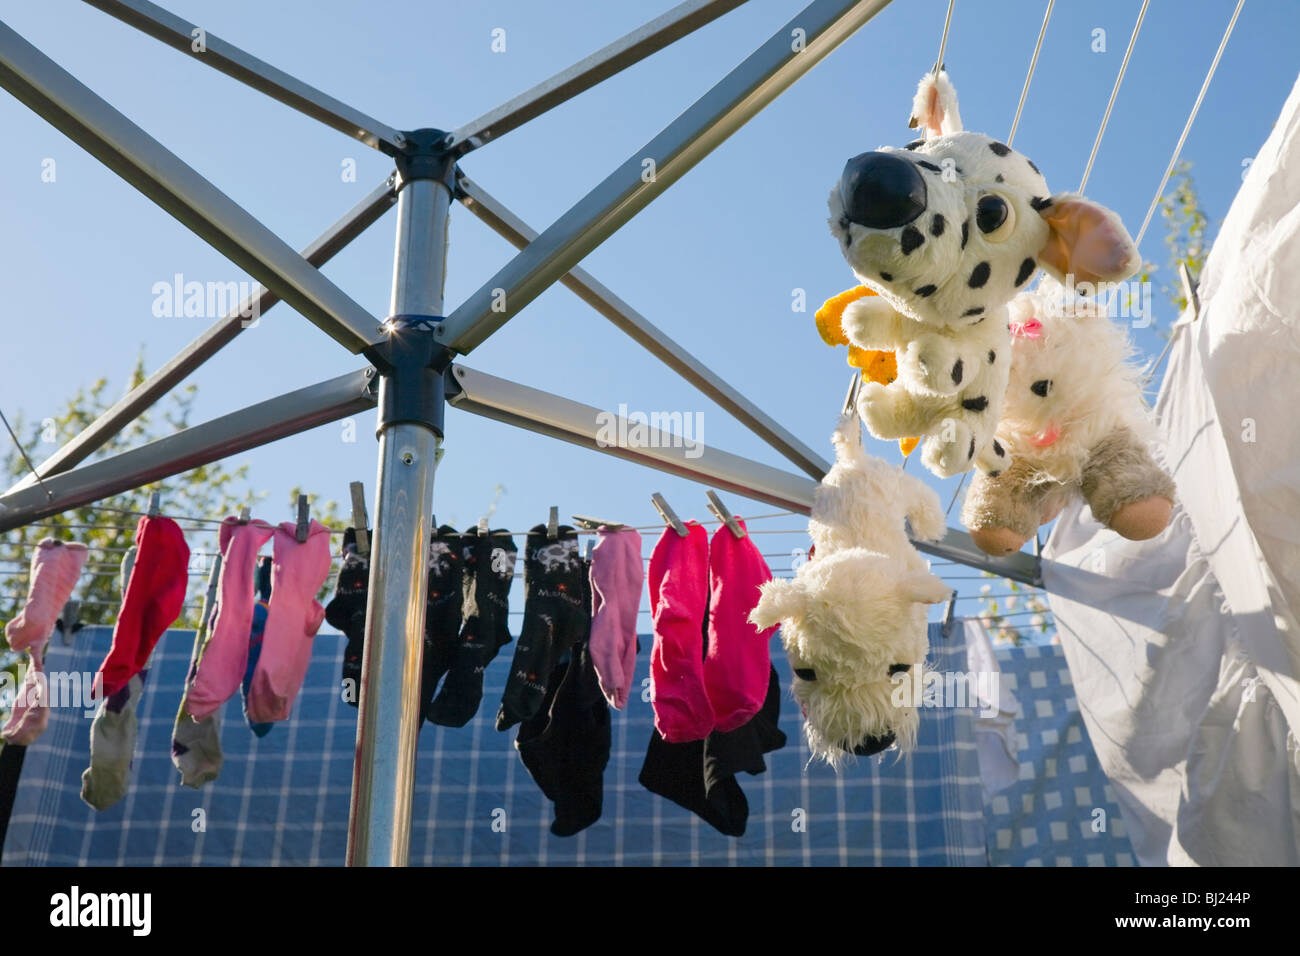 Washed socks and toys hung up to dry. Stock Photo